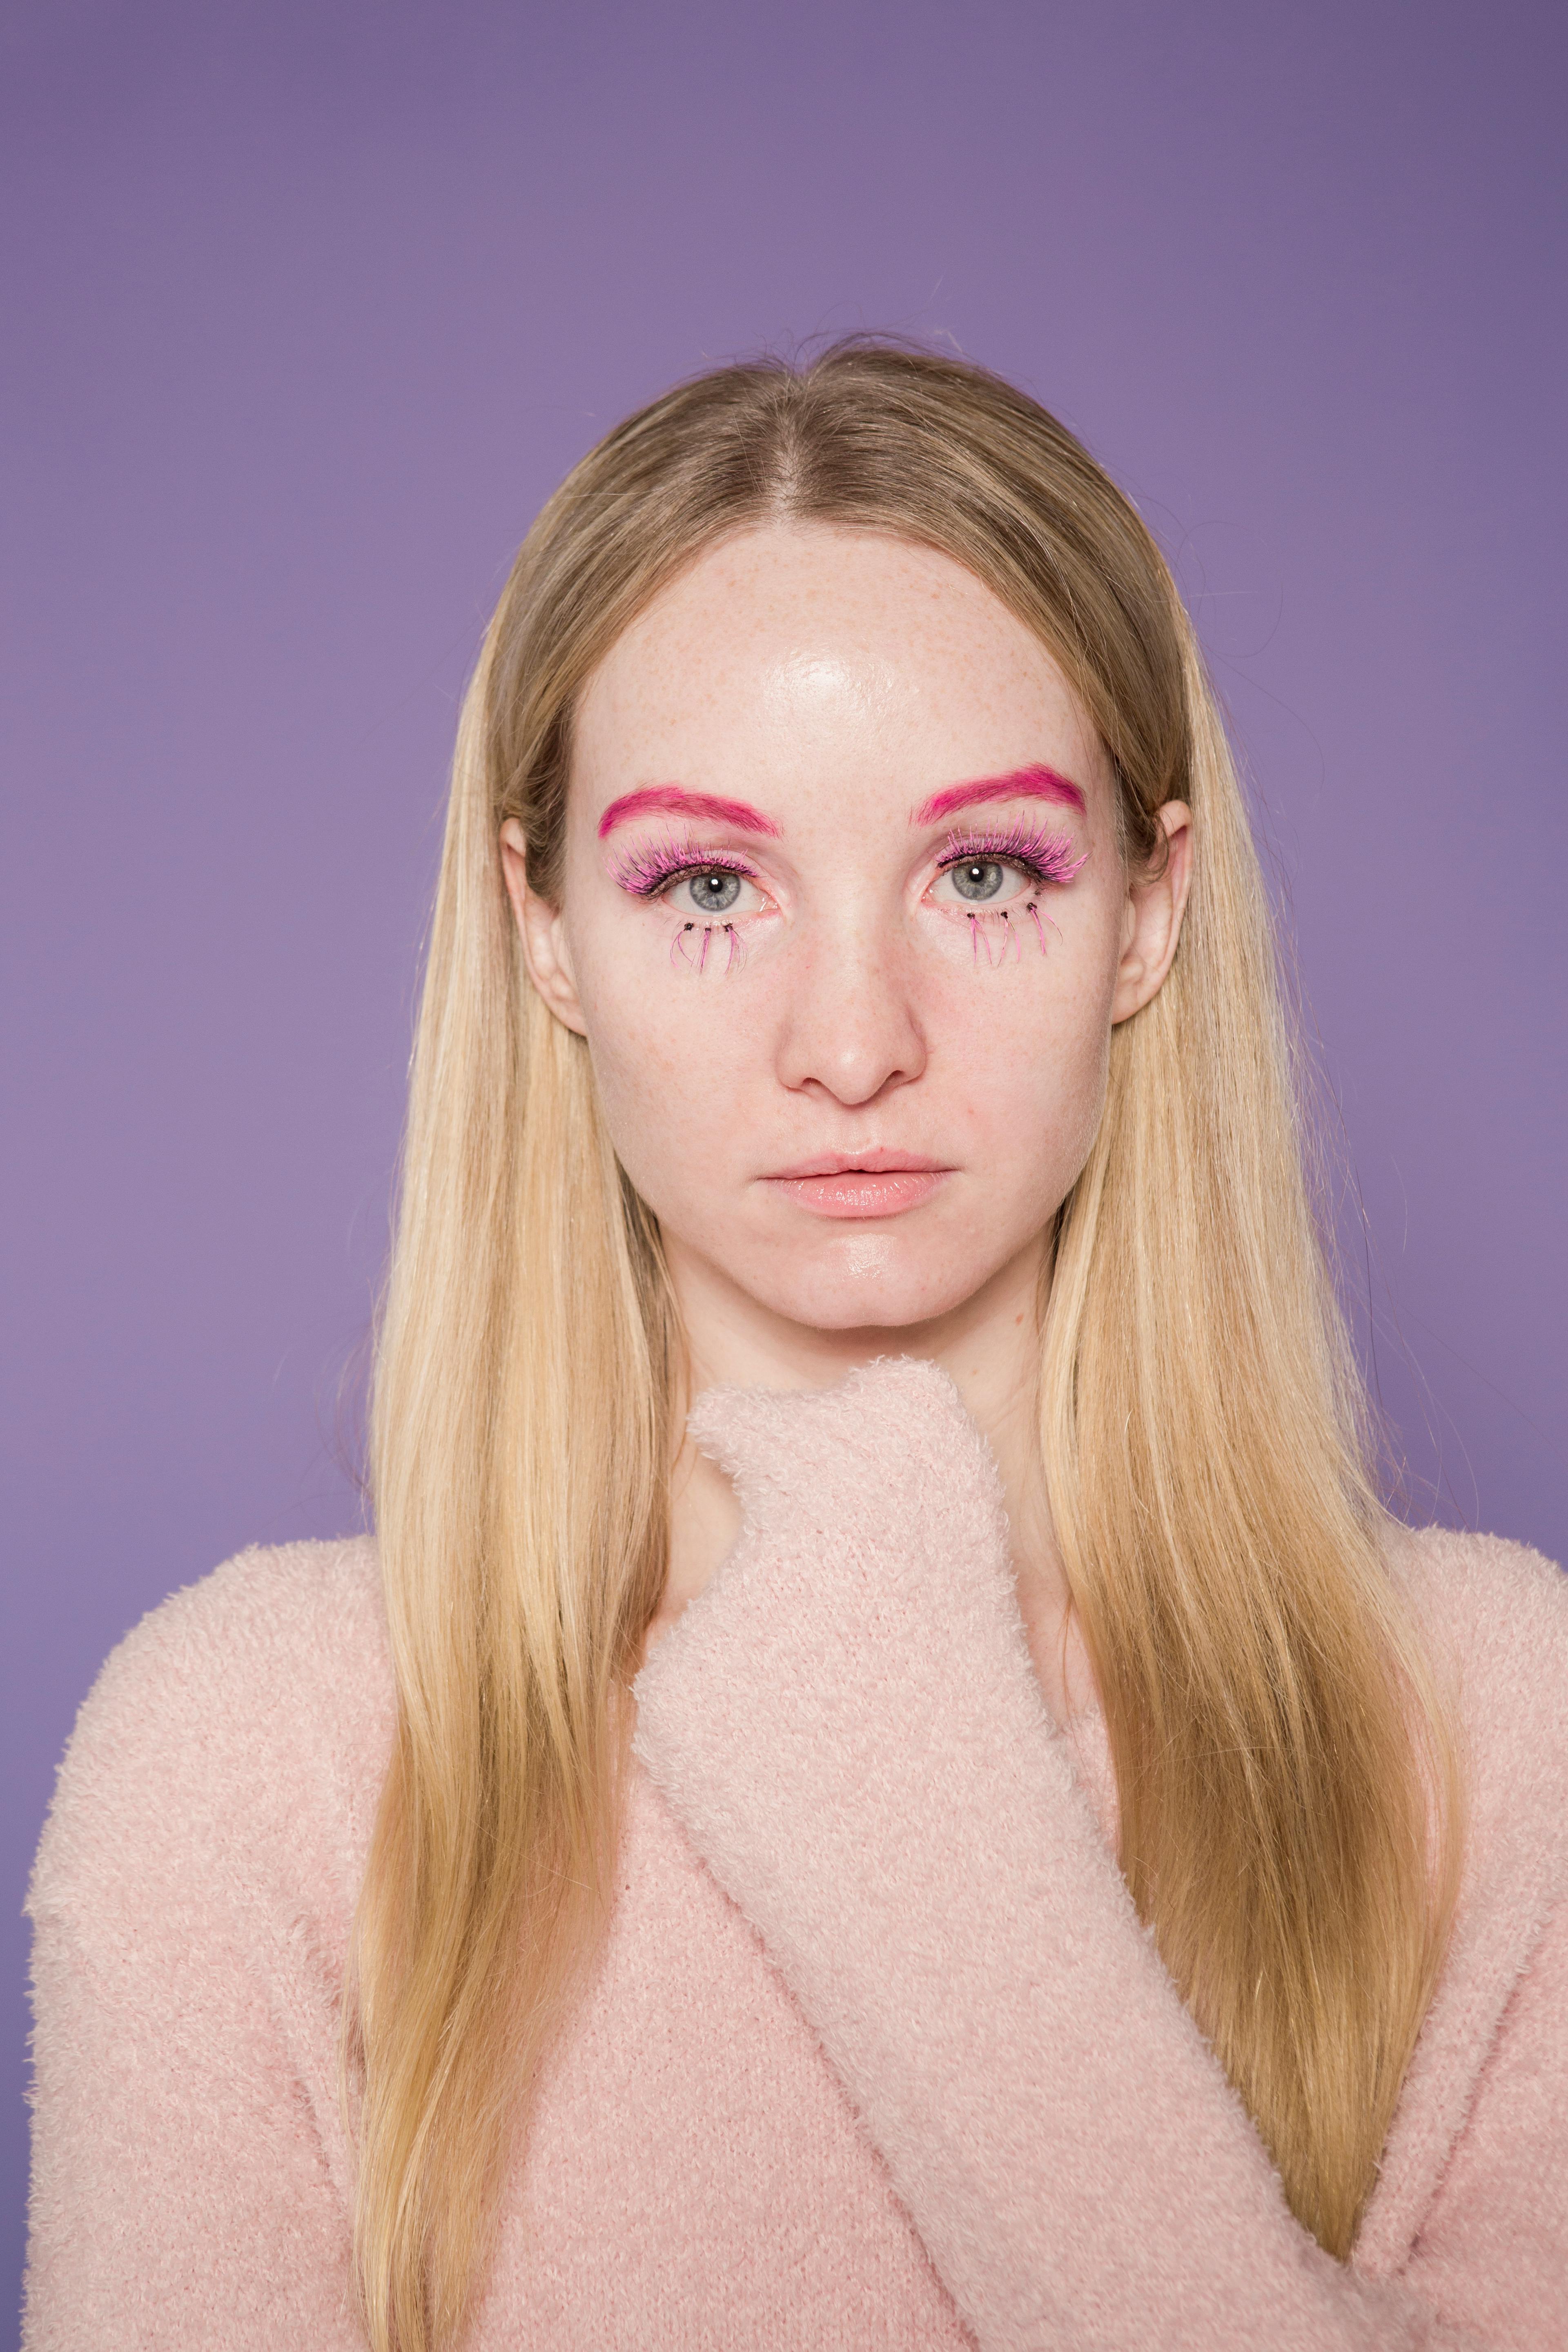 Woman with fair hair and pink eyeshadows · Free Stock Photo